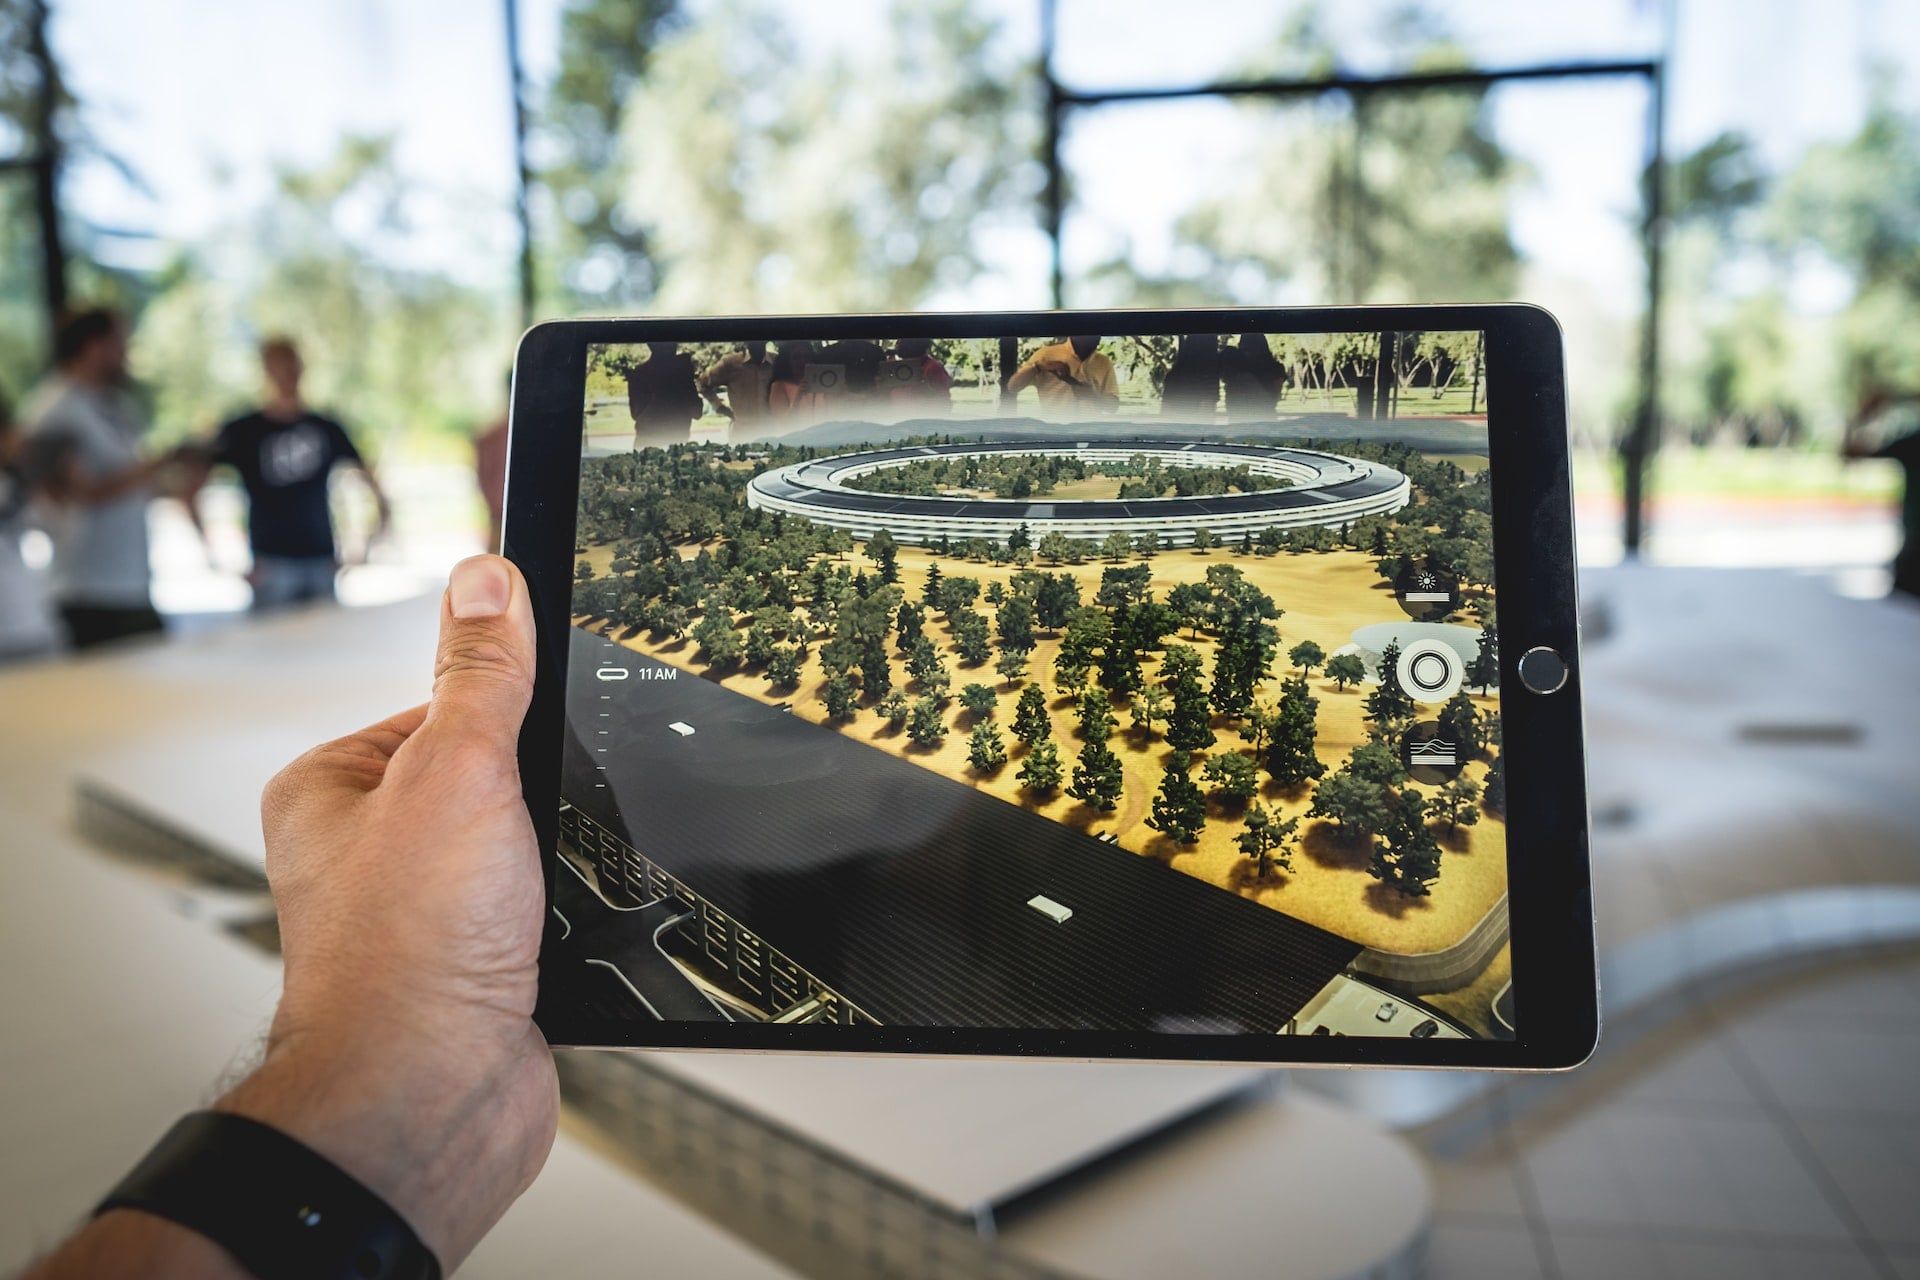 3D model of a building structure on an iPad